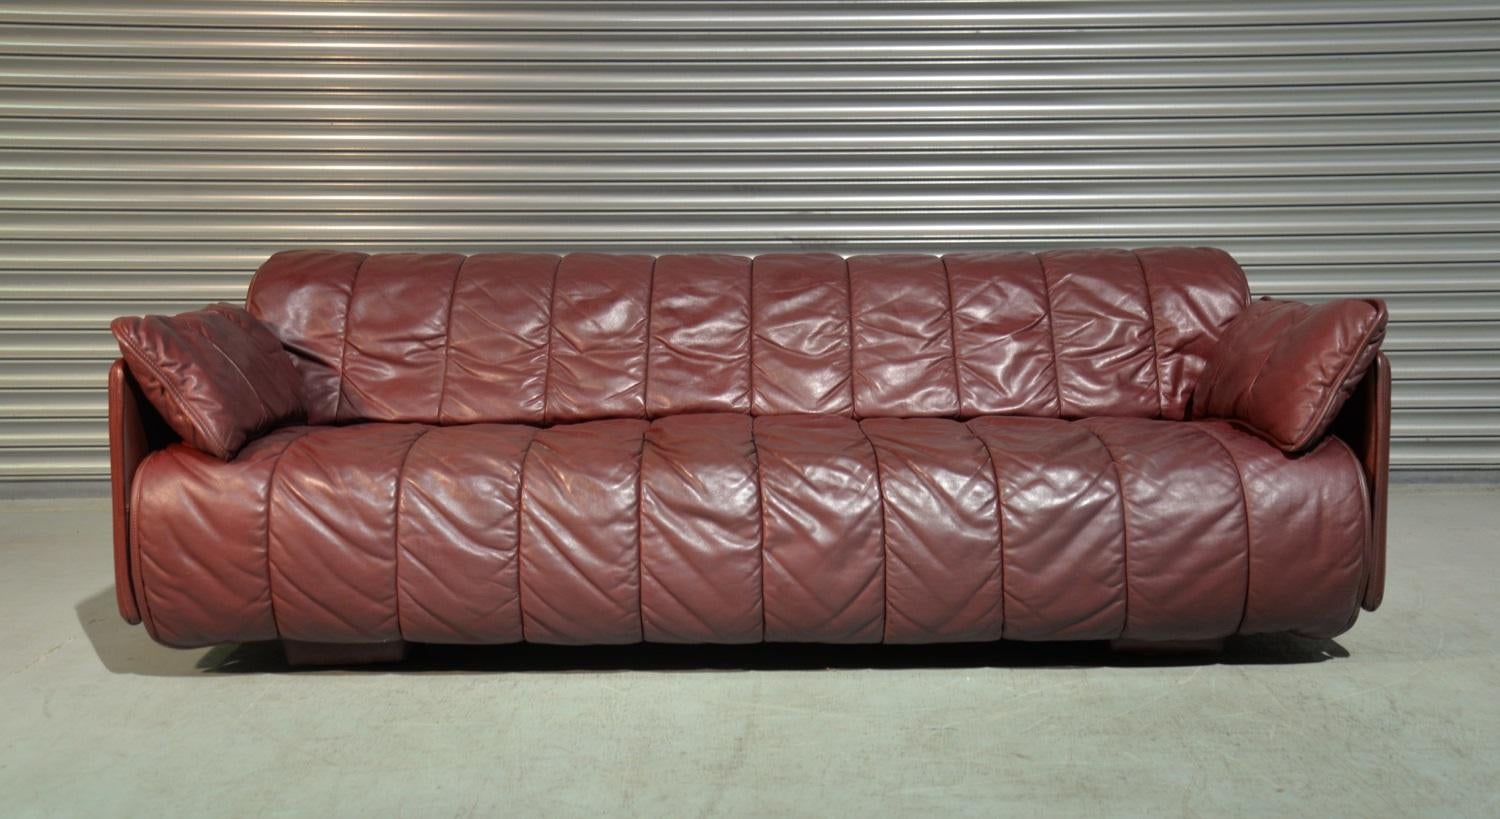 We are delighted to bring to you an rare vintage De Sede sofa or daybed. Made by De Sede craftsman in Switzerland, this convertible sofa or daybed is upholstered in beautiful burgundy quilted aniline leather with two occasional cushions. It`s